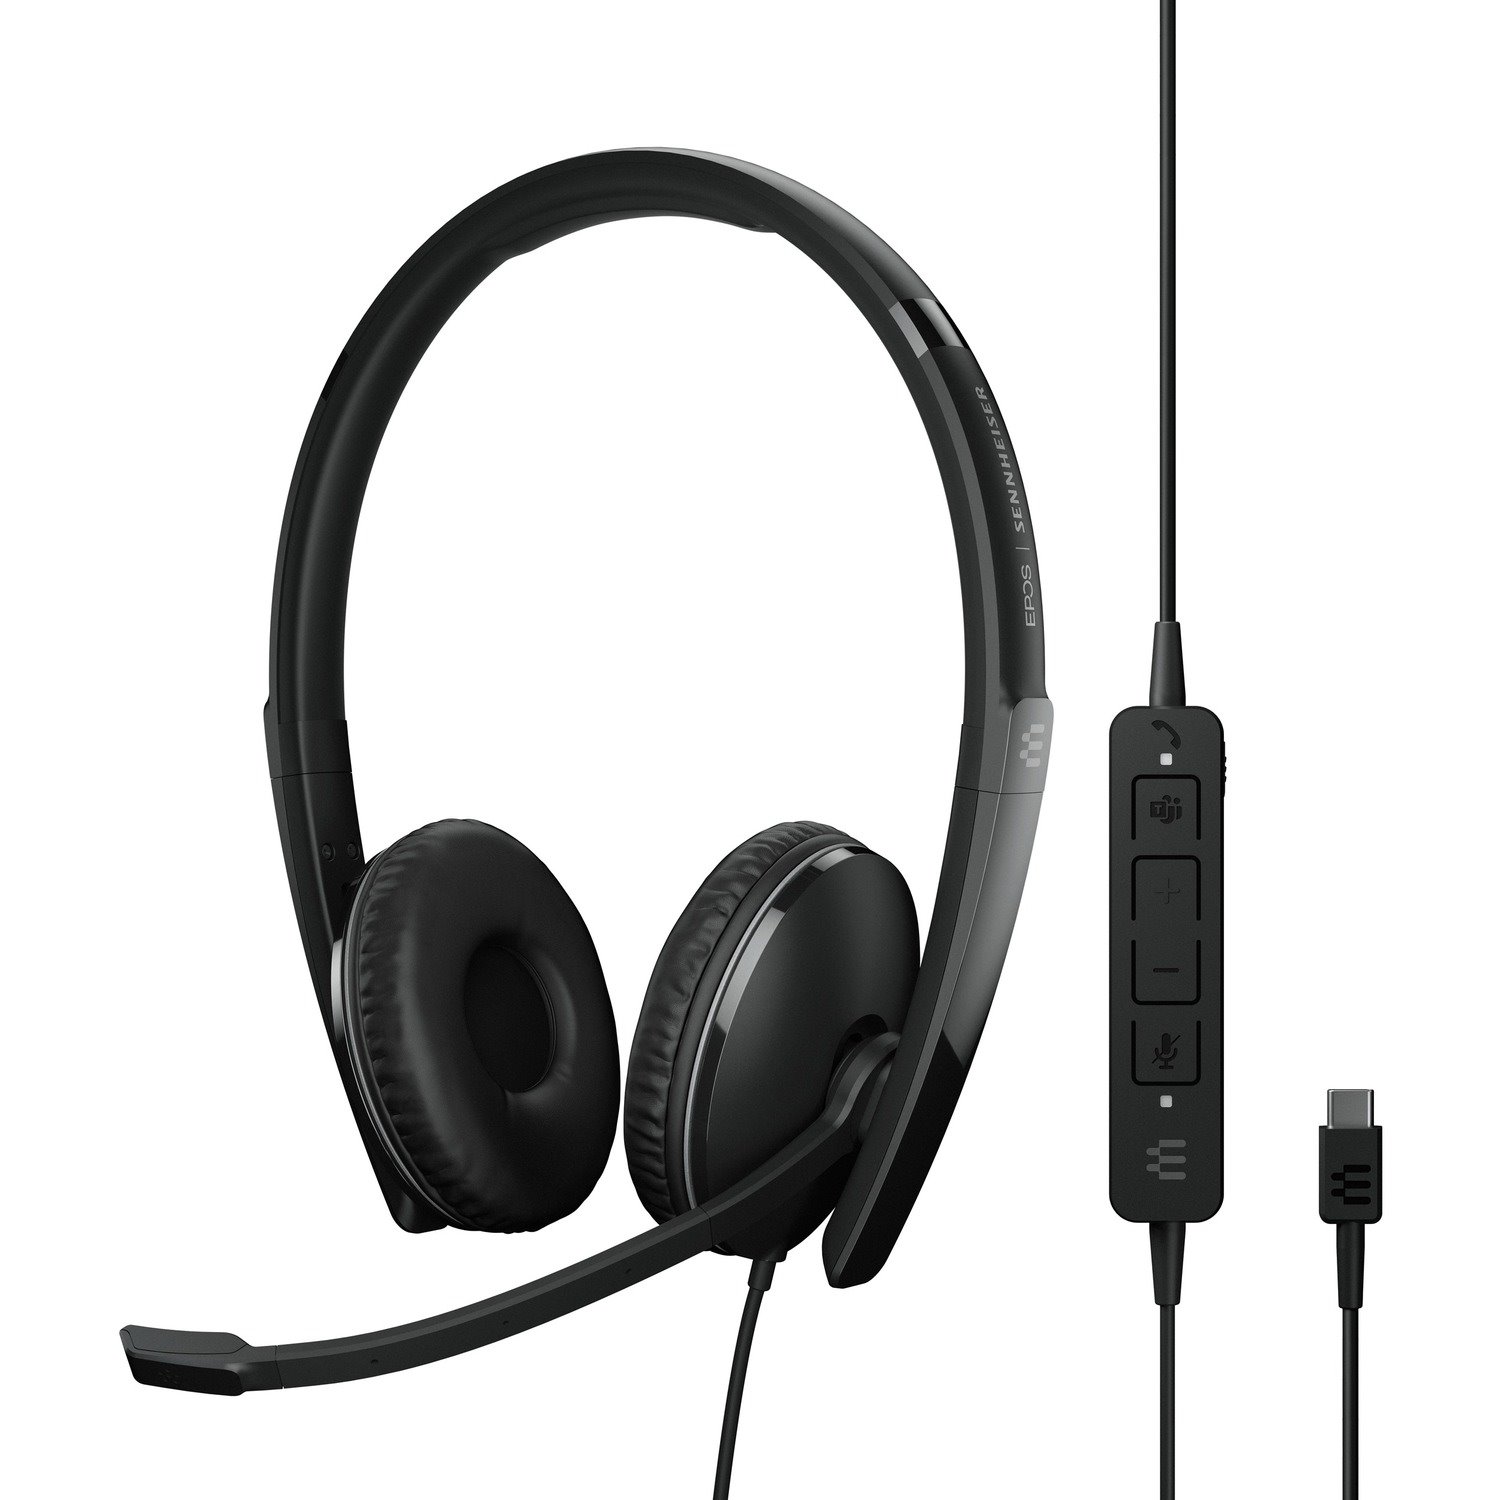 EPOS ADAPT ADAPT 160T ANC USB-C Wired On-ear Stereo Headset